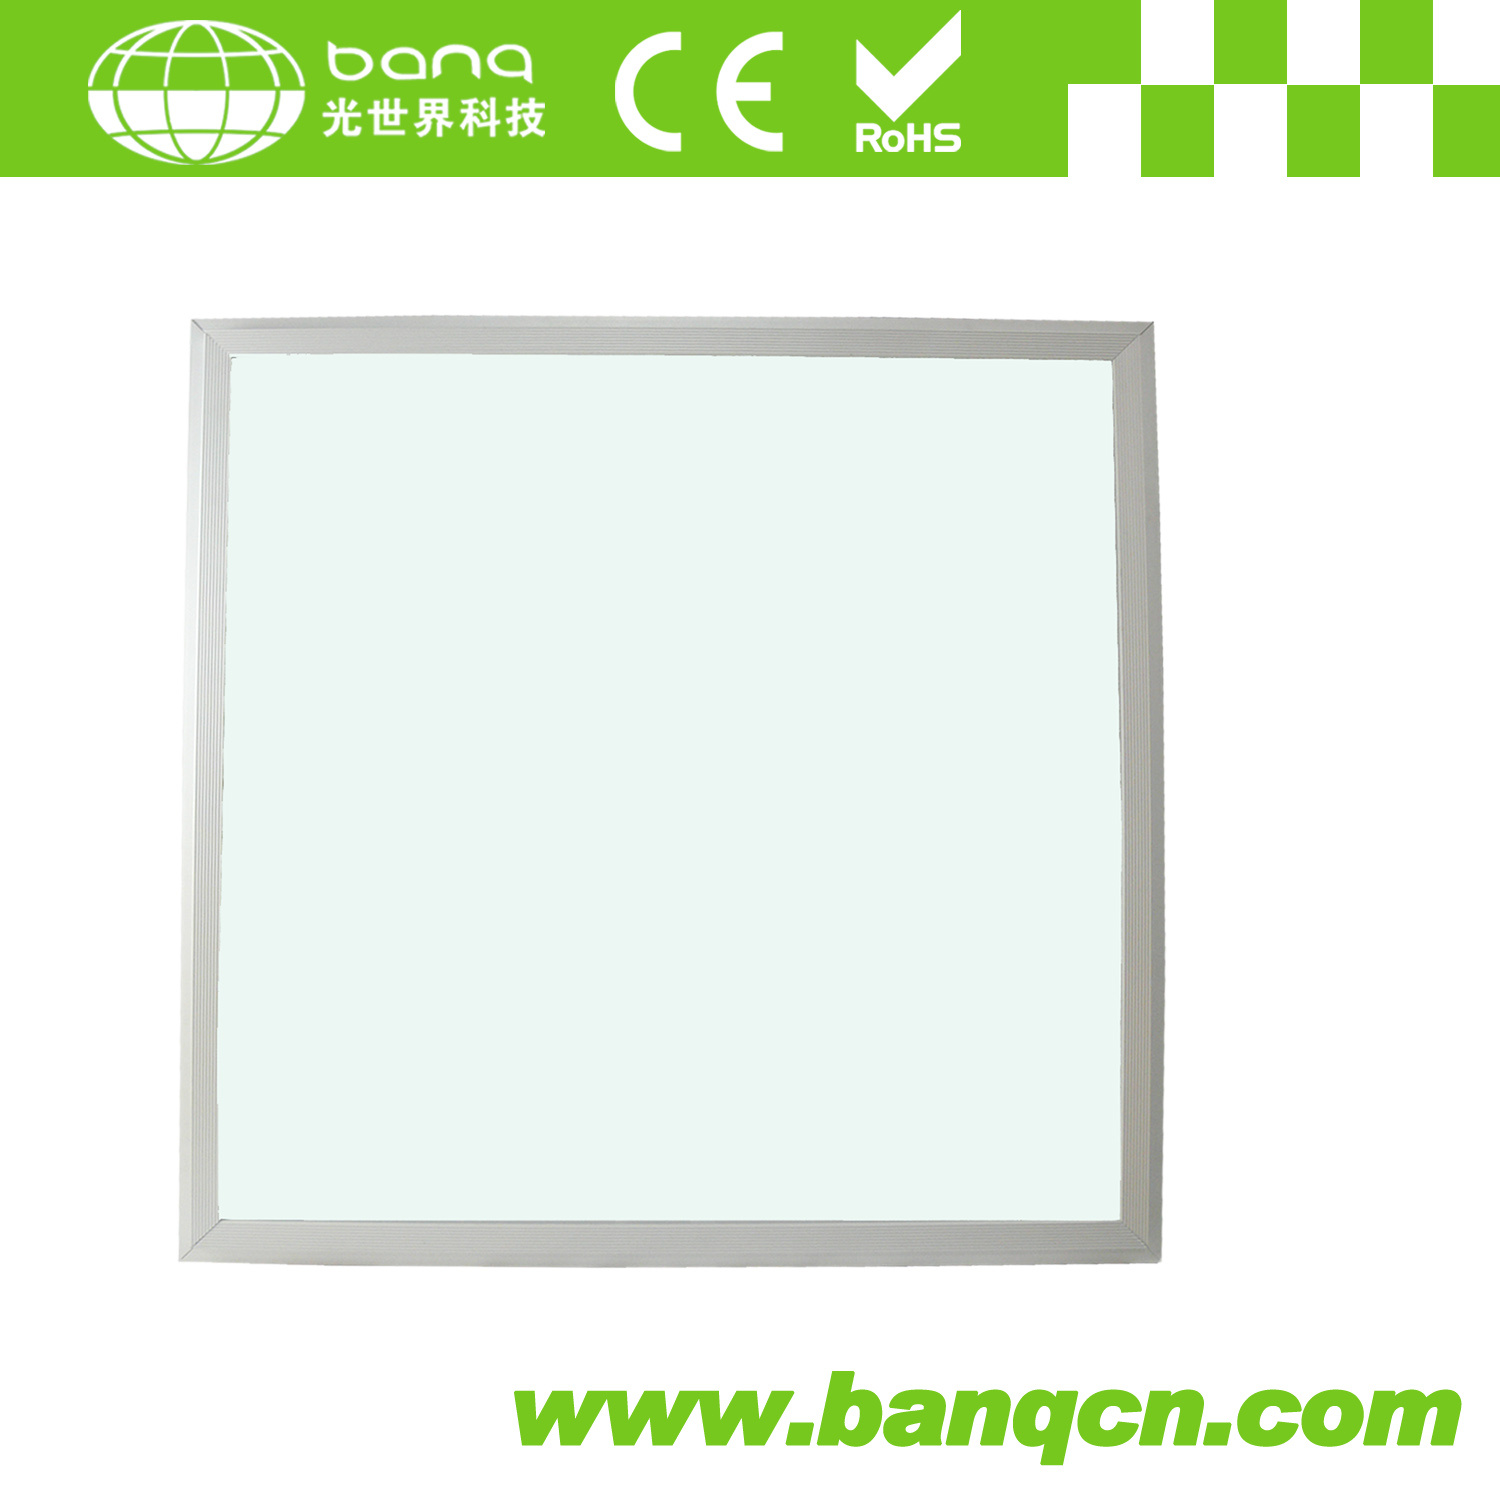 Dimmable 595*595 LED Panel Light 42W SMD3014 LED Panellight